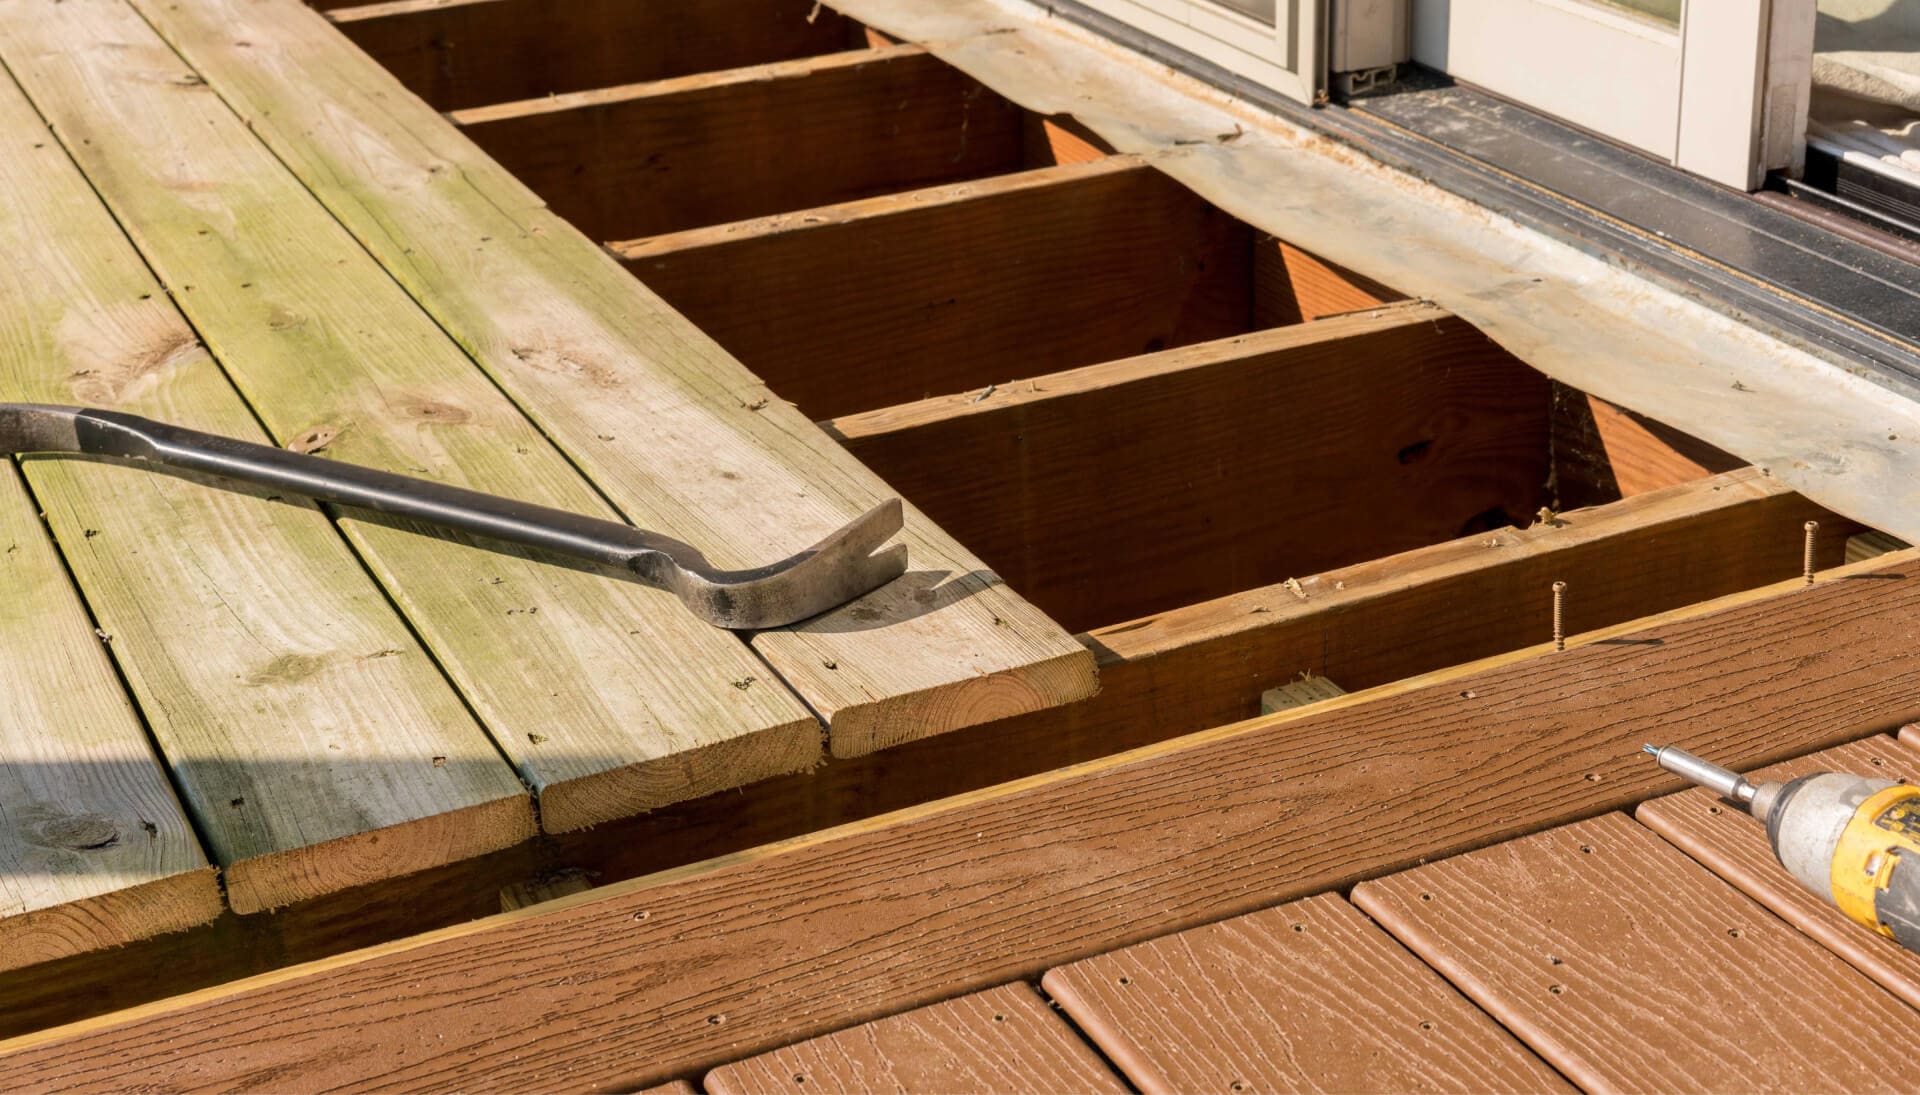 We offer the best deck repair services in Des Moines, IA